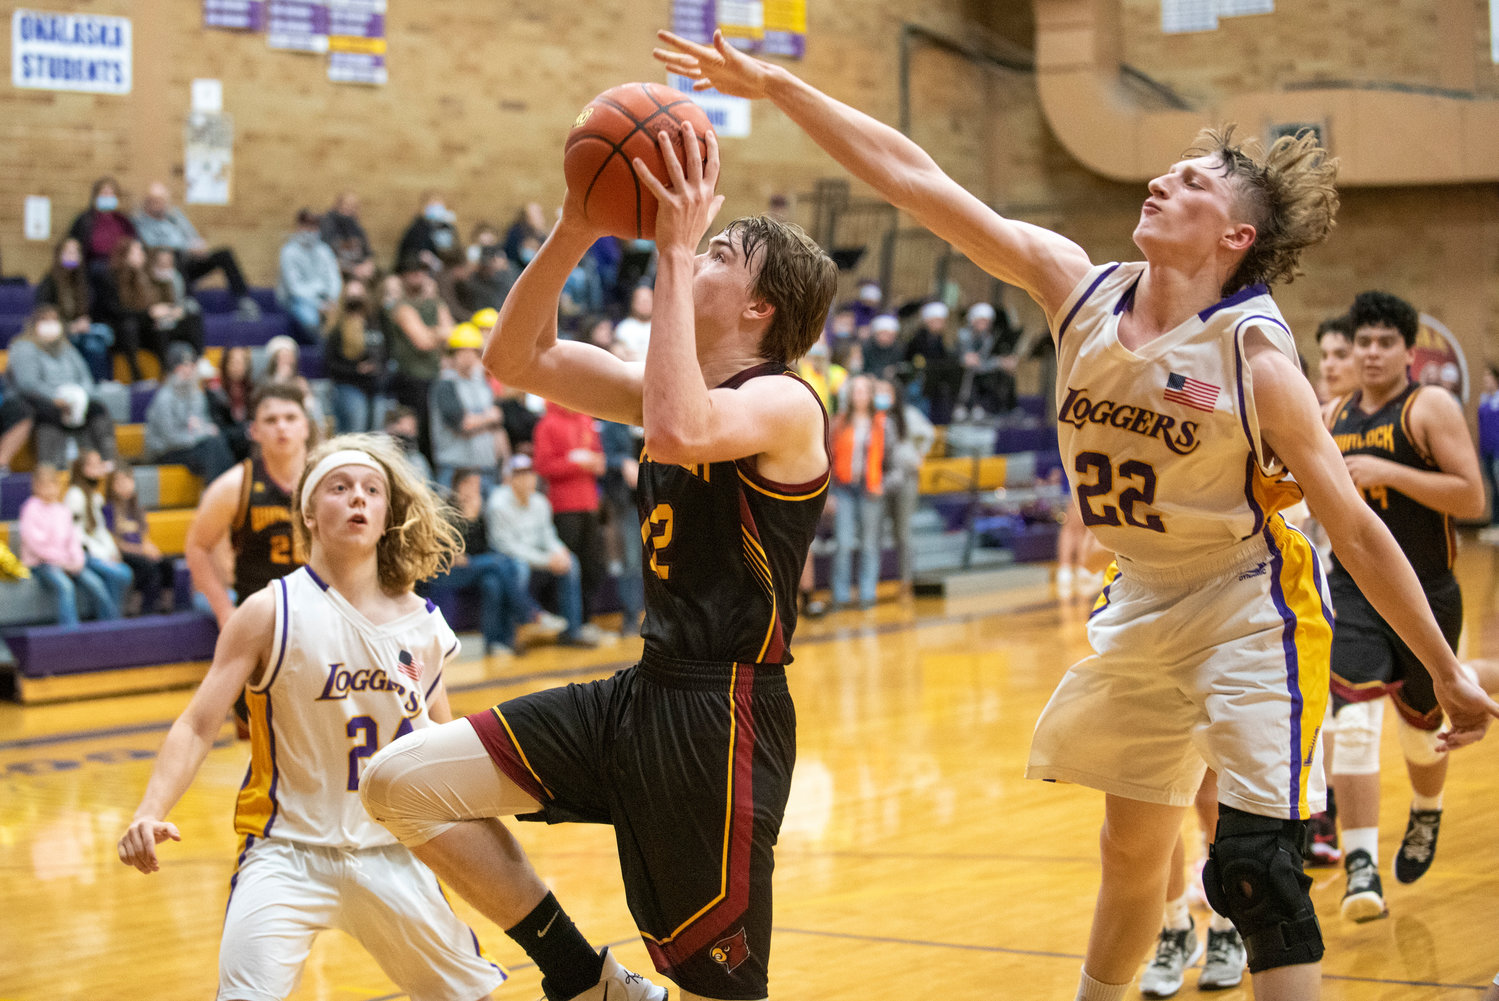 Winlock's Chase Schofield (12) drives for a layup against Onalaska on Dec. 9.